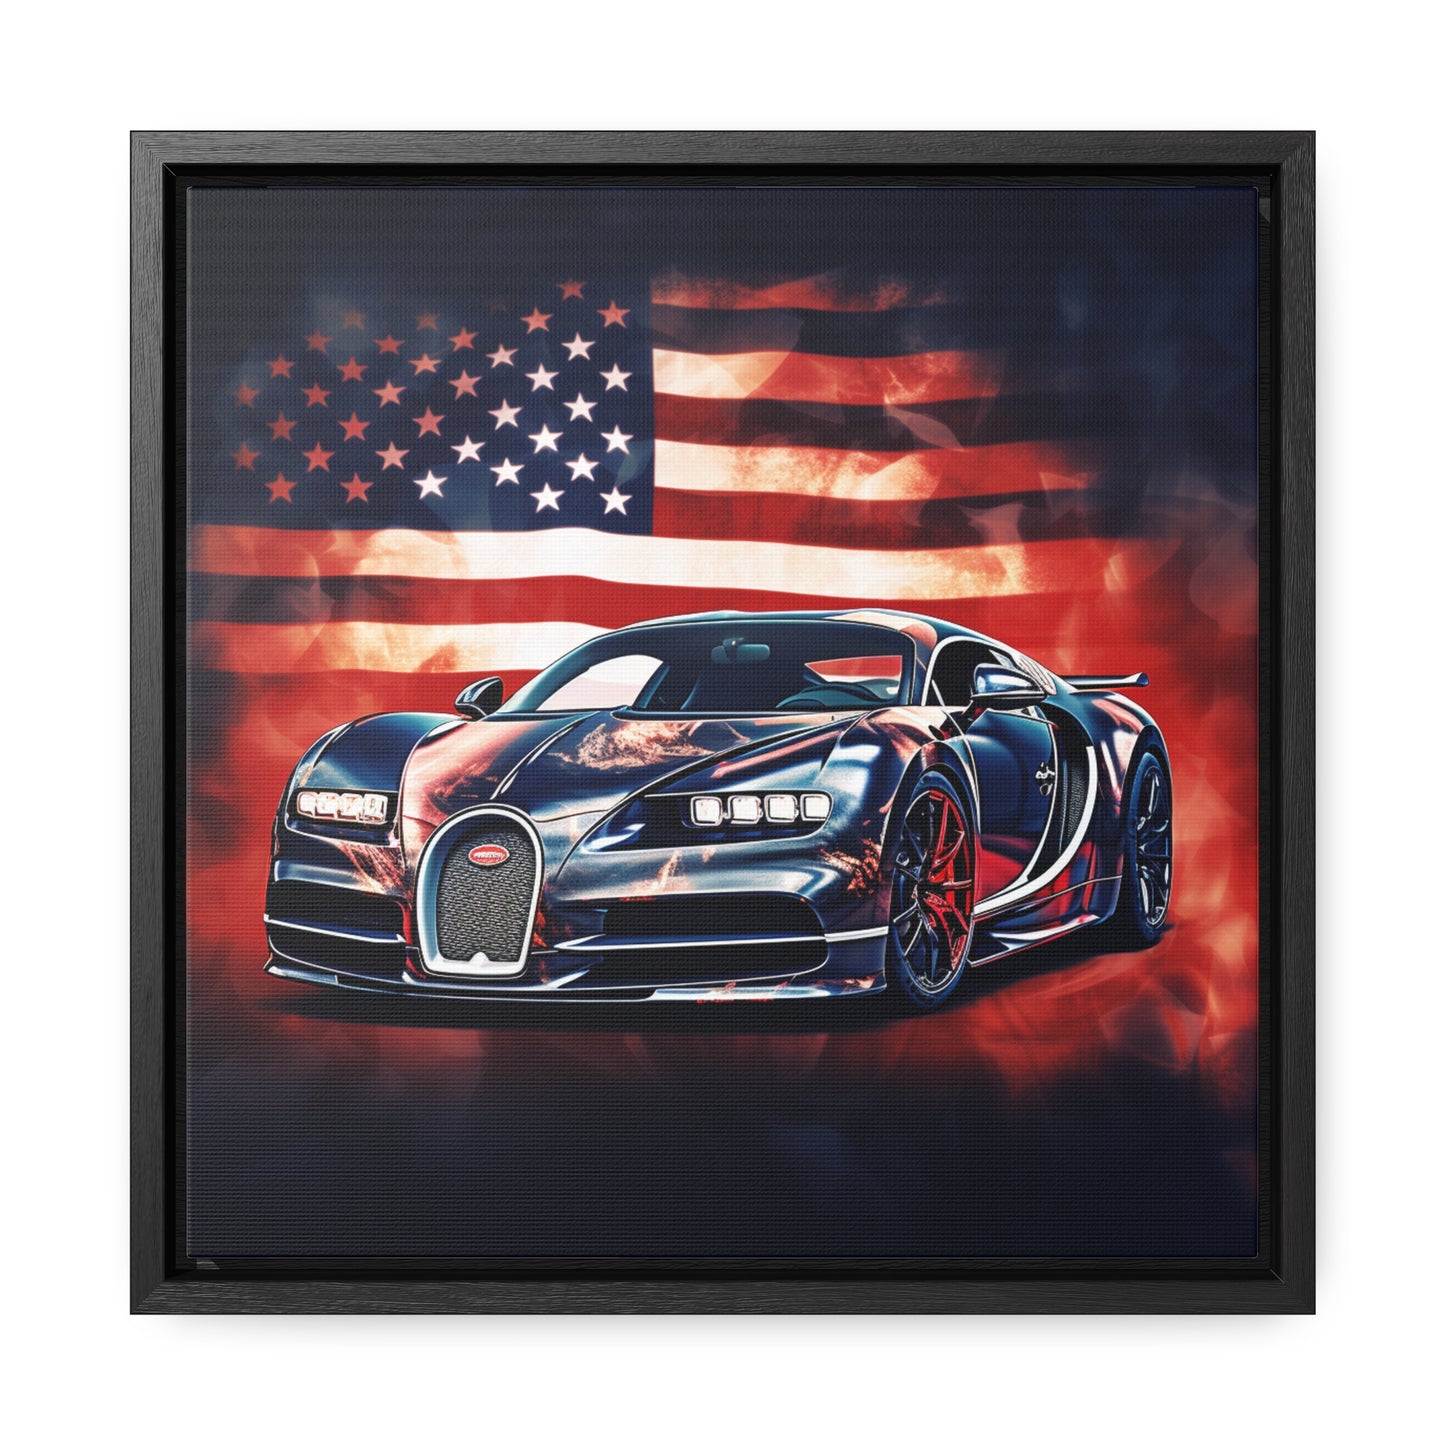 Gallery Canvas Wraps, Square Frame Abstract American Flag Background Bugatti 4